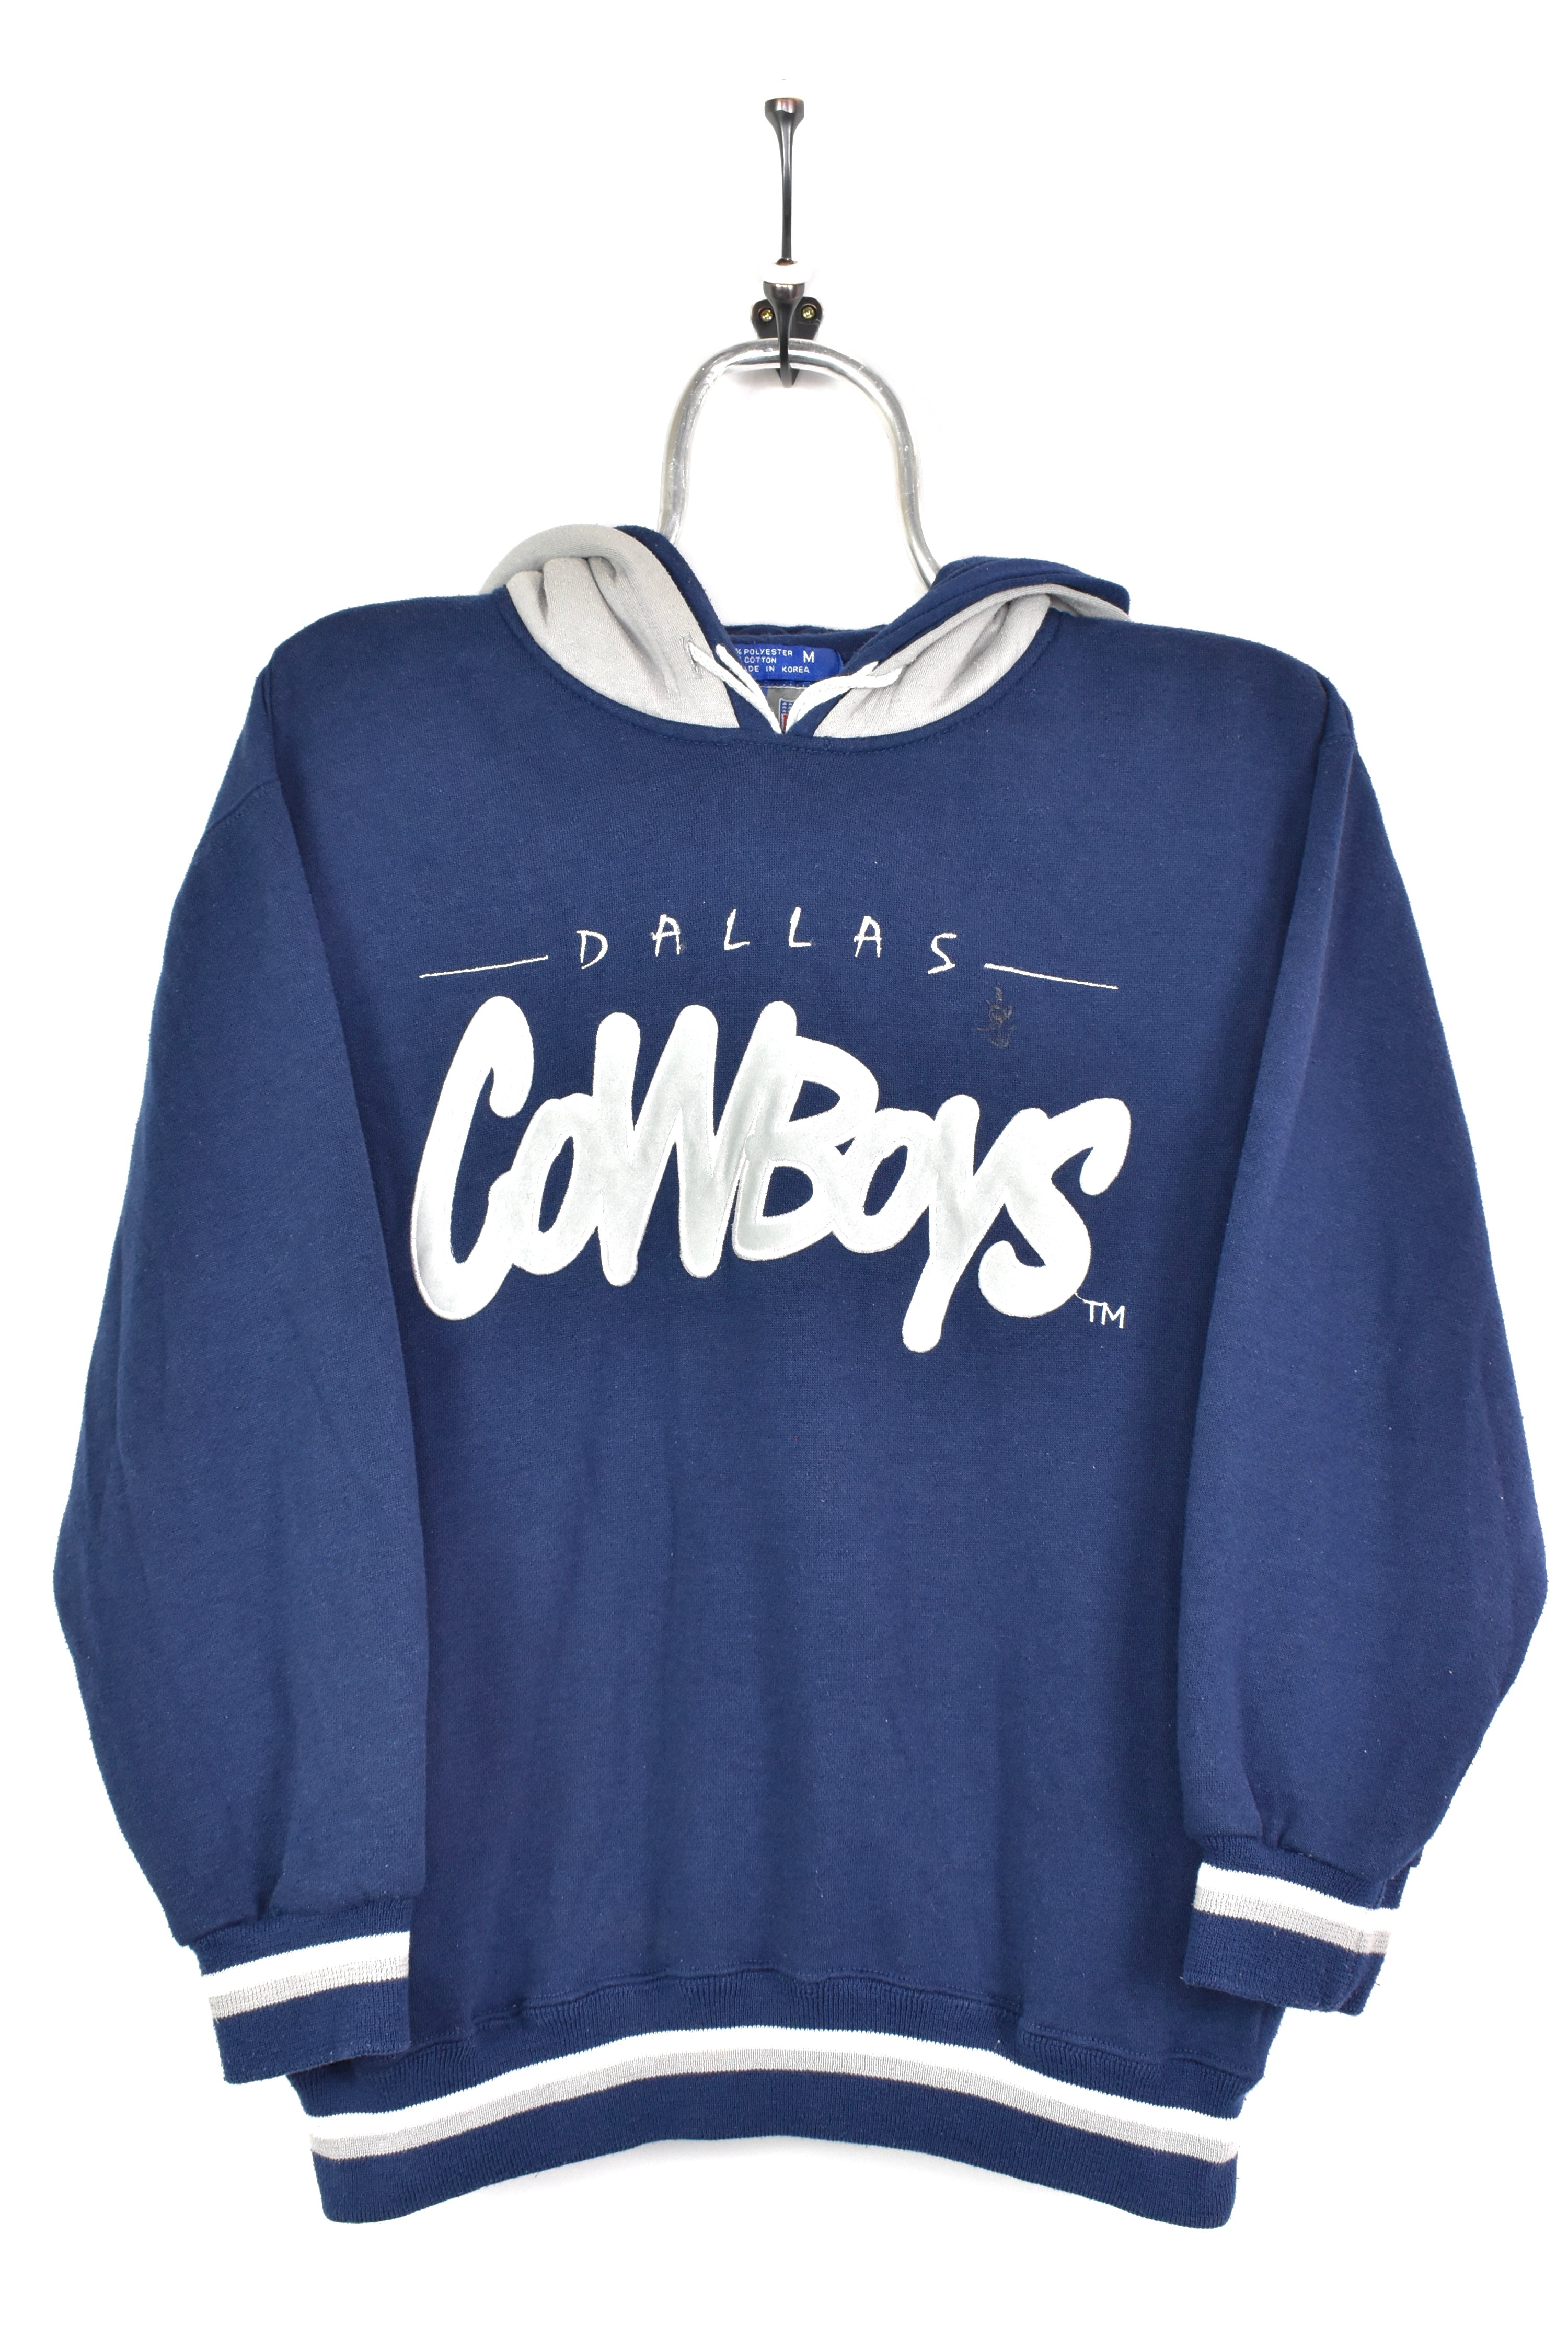 Little Earth Productions, Sweaters, Nfl Dallas Cowboys Womens Apparel  Baja Styled Sweater Hoodie Sm